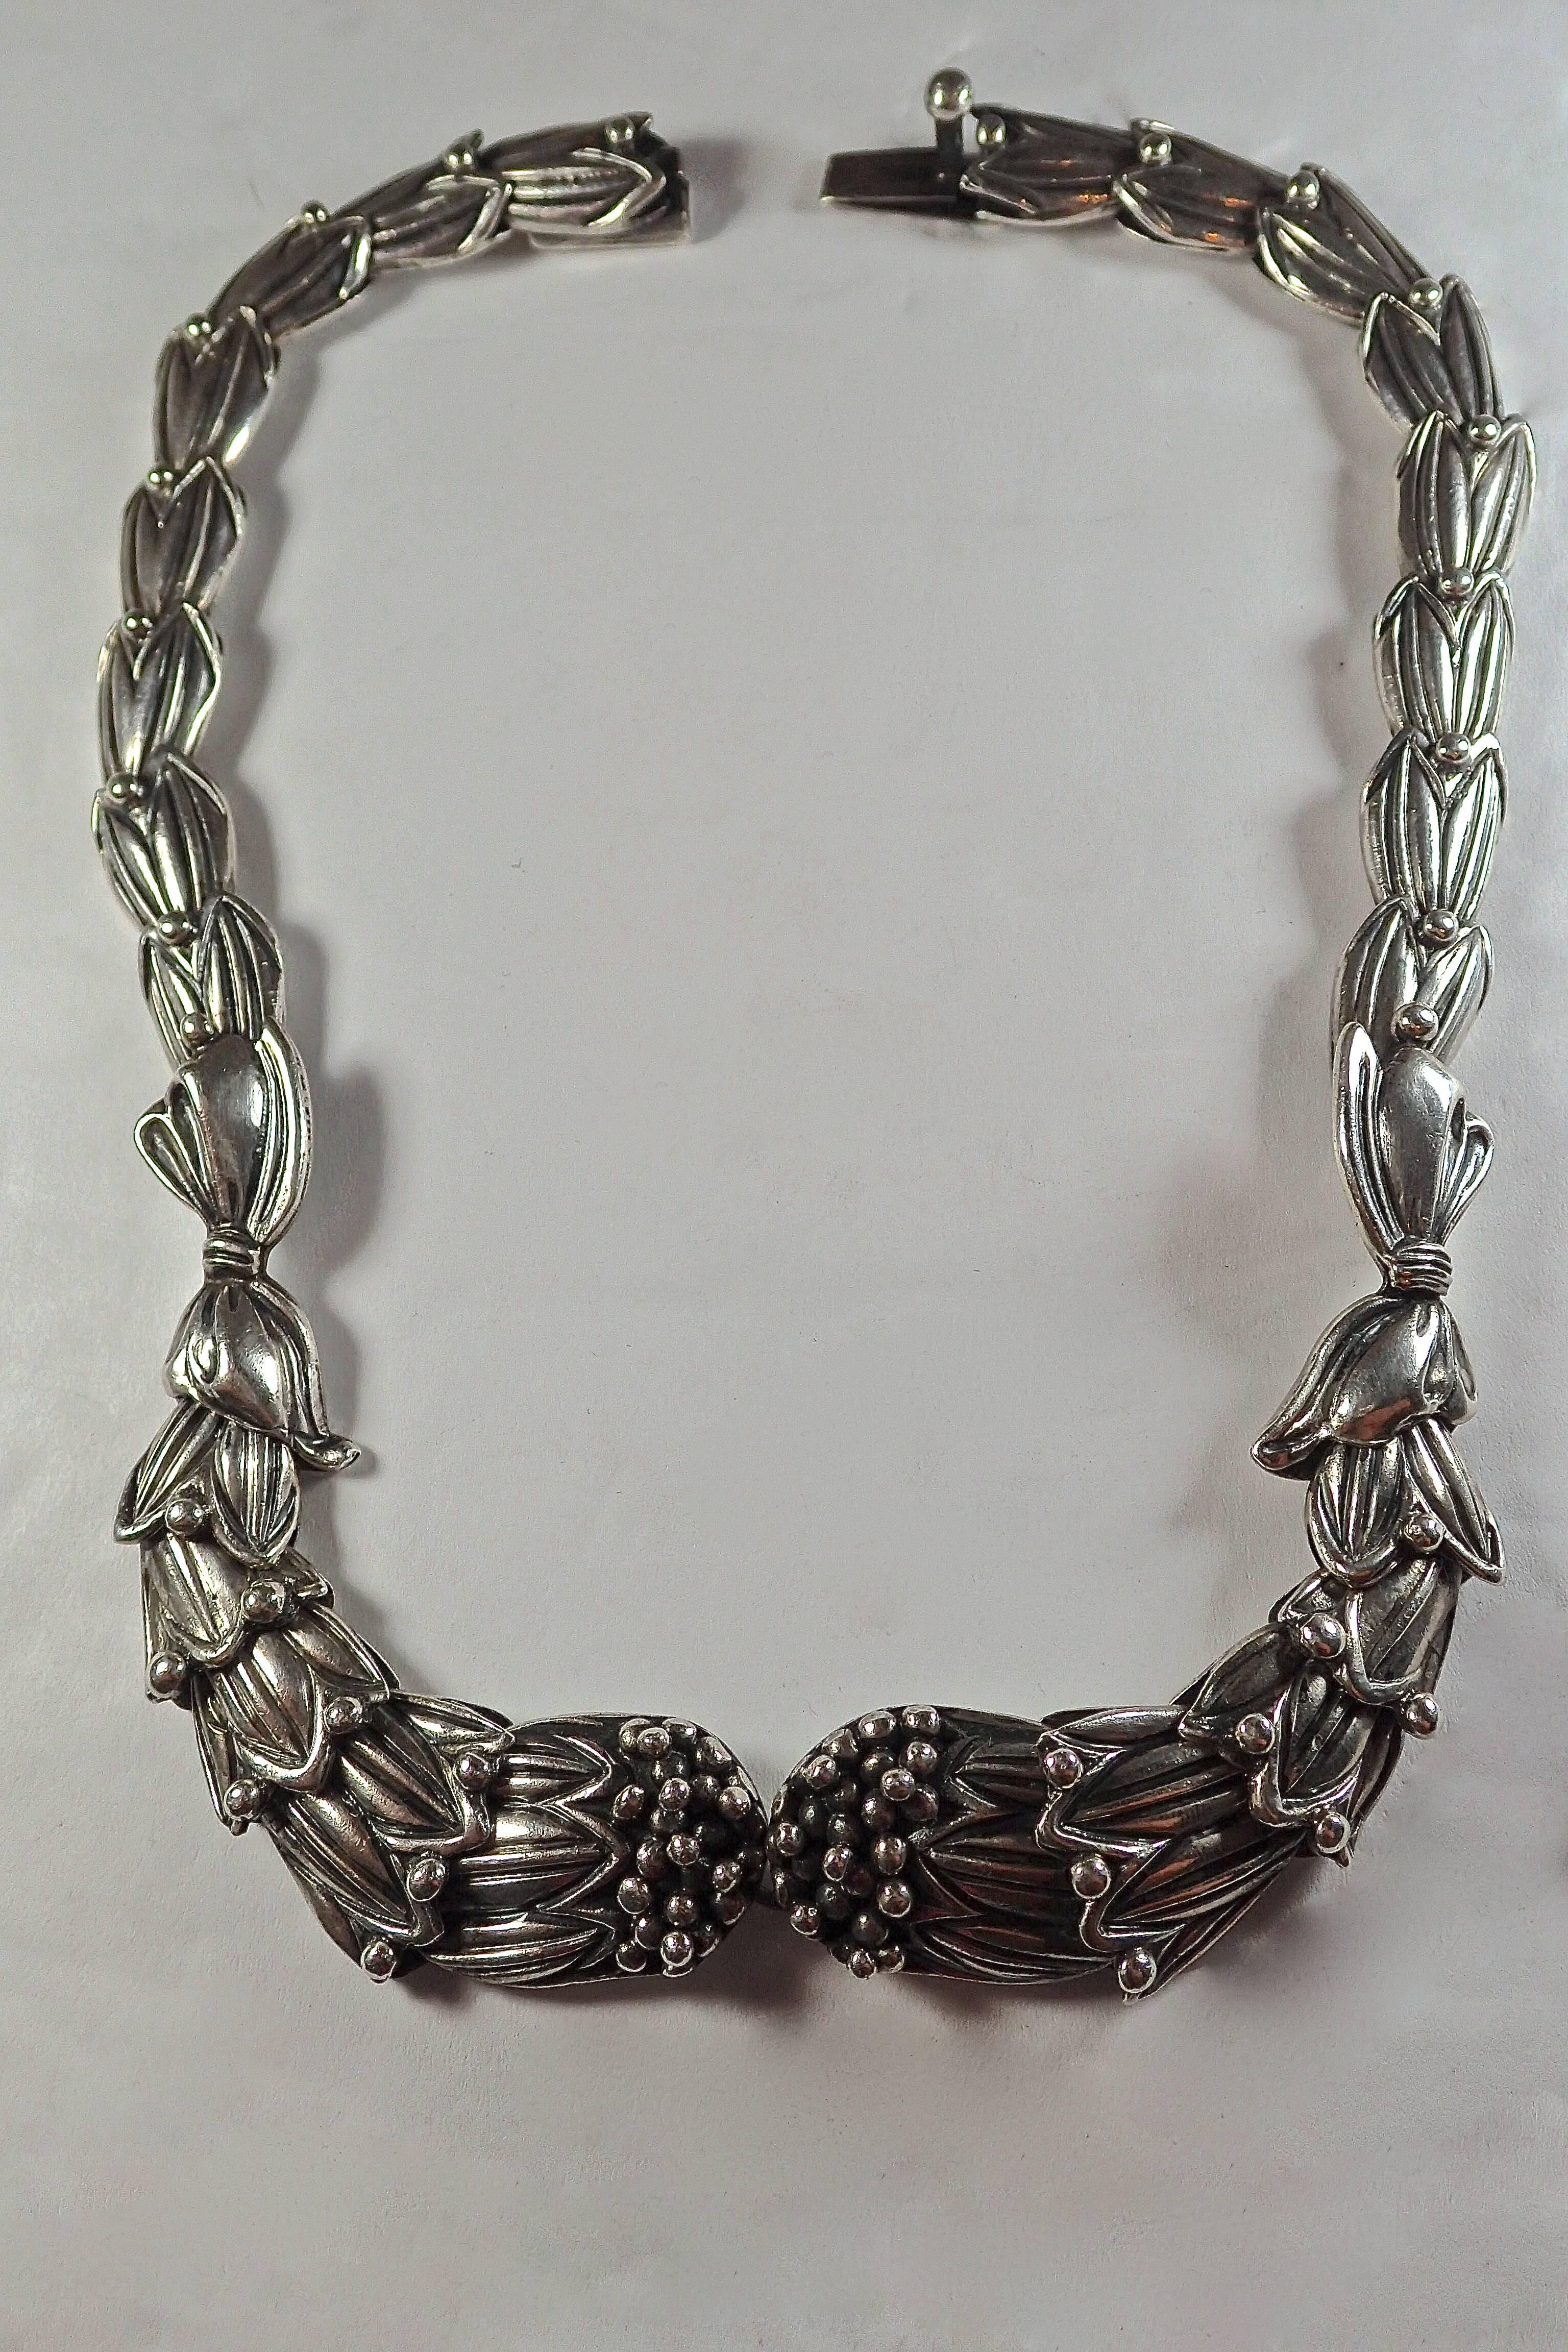 Mexican Sterling Silver 
Beautifully detailed and handcrafted hinged cuff and riveted necklace. Each of the three pieces are signed for authenticity and remain in excellent condition. 
Necklace length: 15.5 inches
Bracelet cuff: 6.5 x 2.5